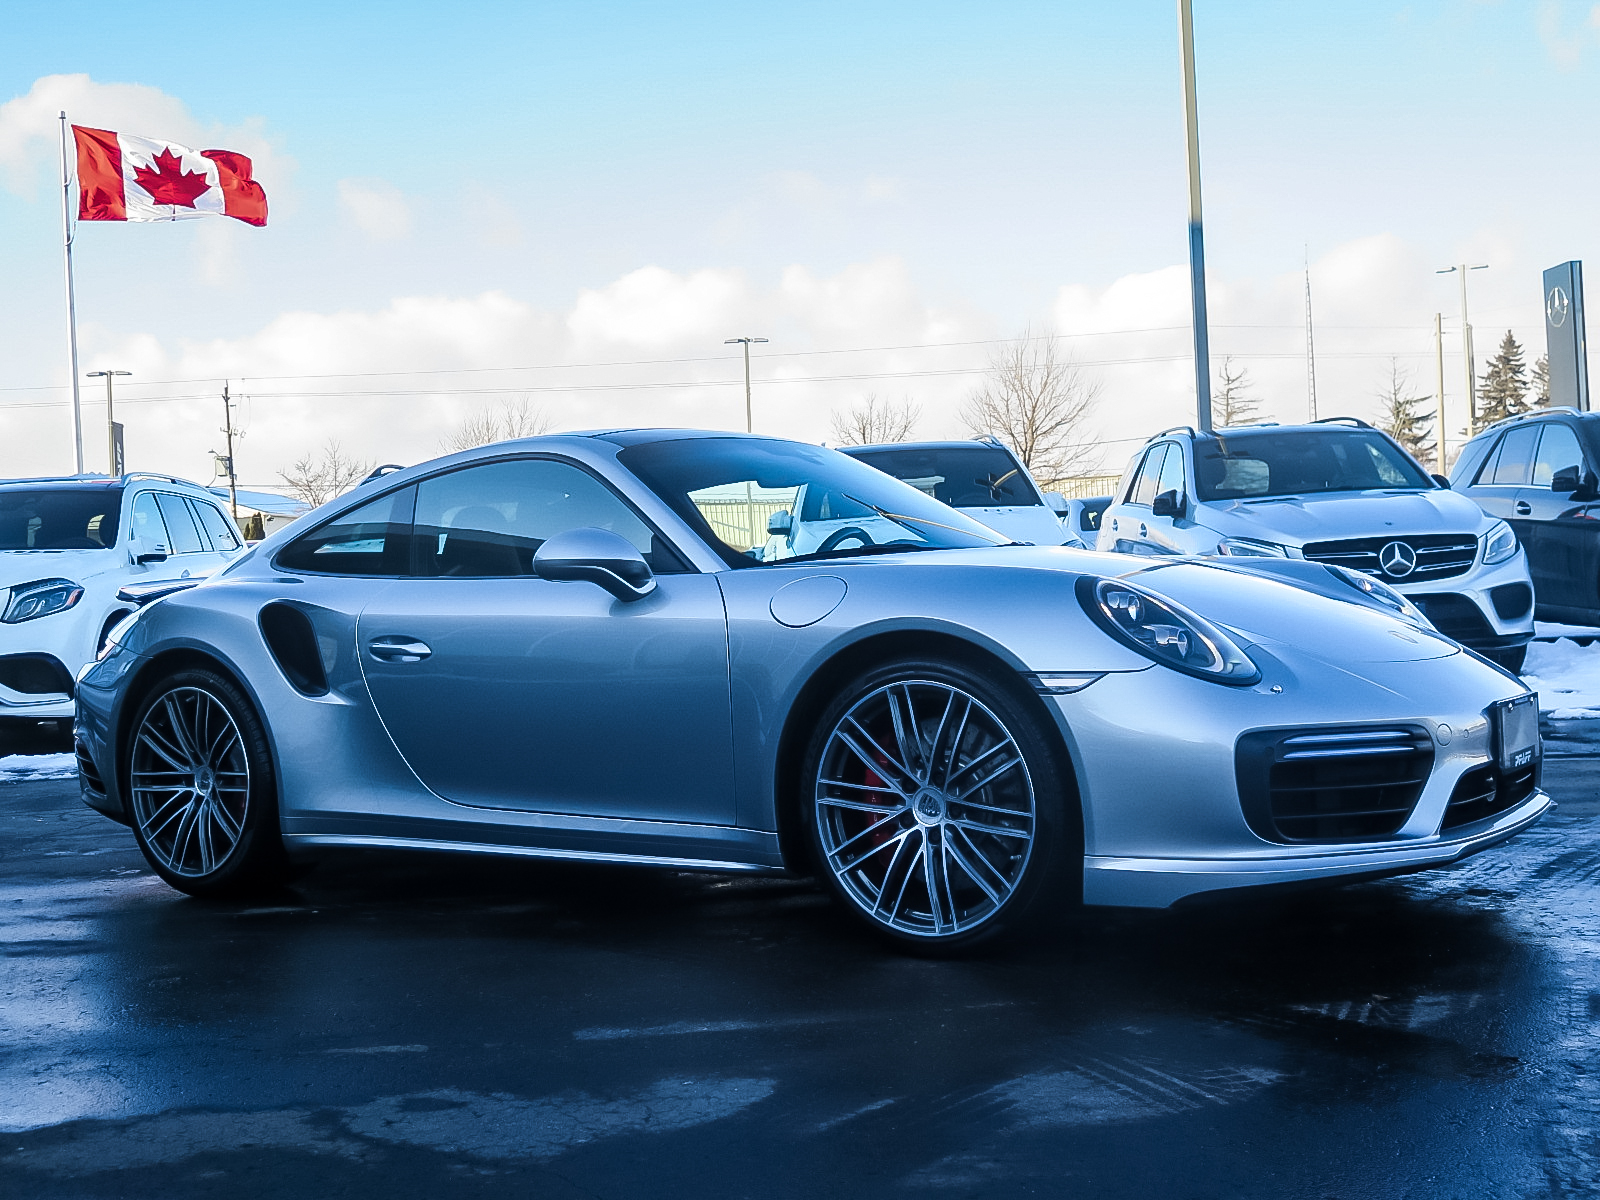 PreOwned 2017 Porsche 911 Turbo Coupe PDK 2Door Coupe in